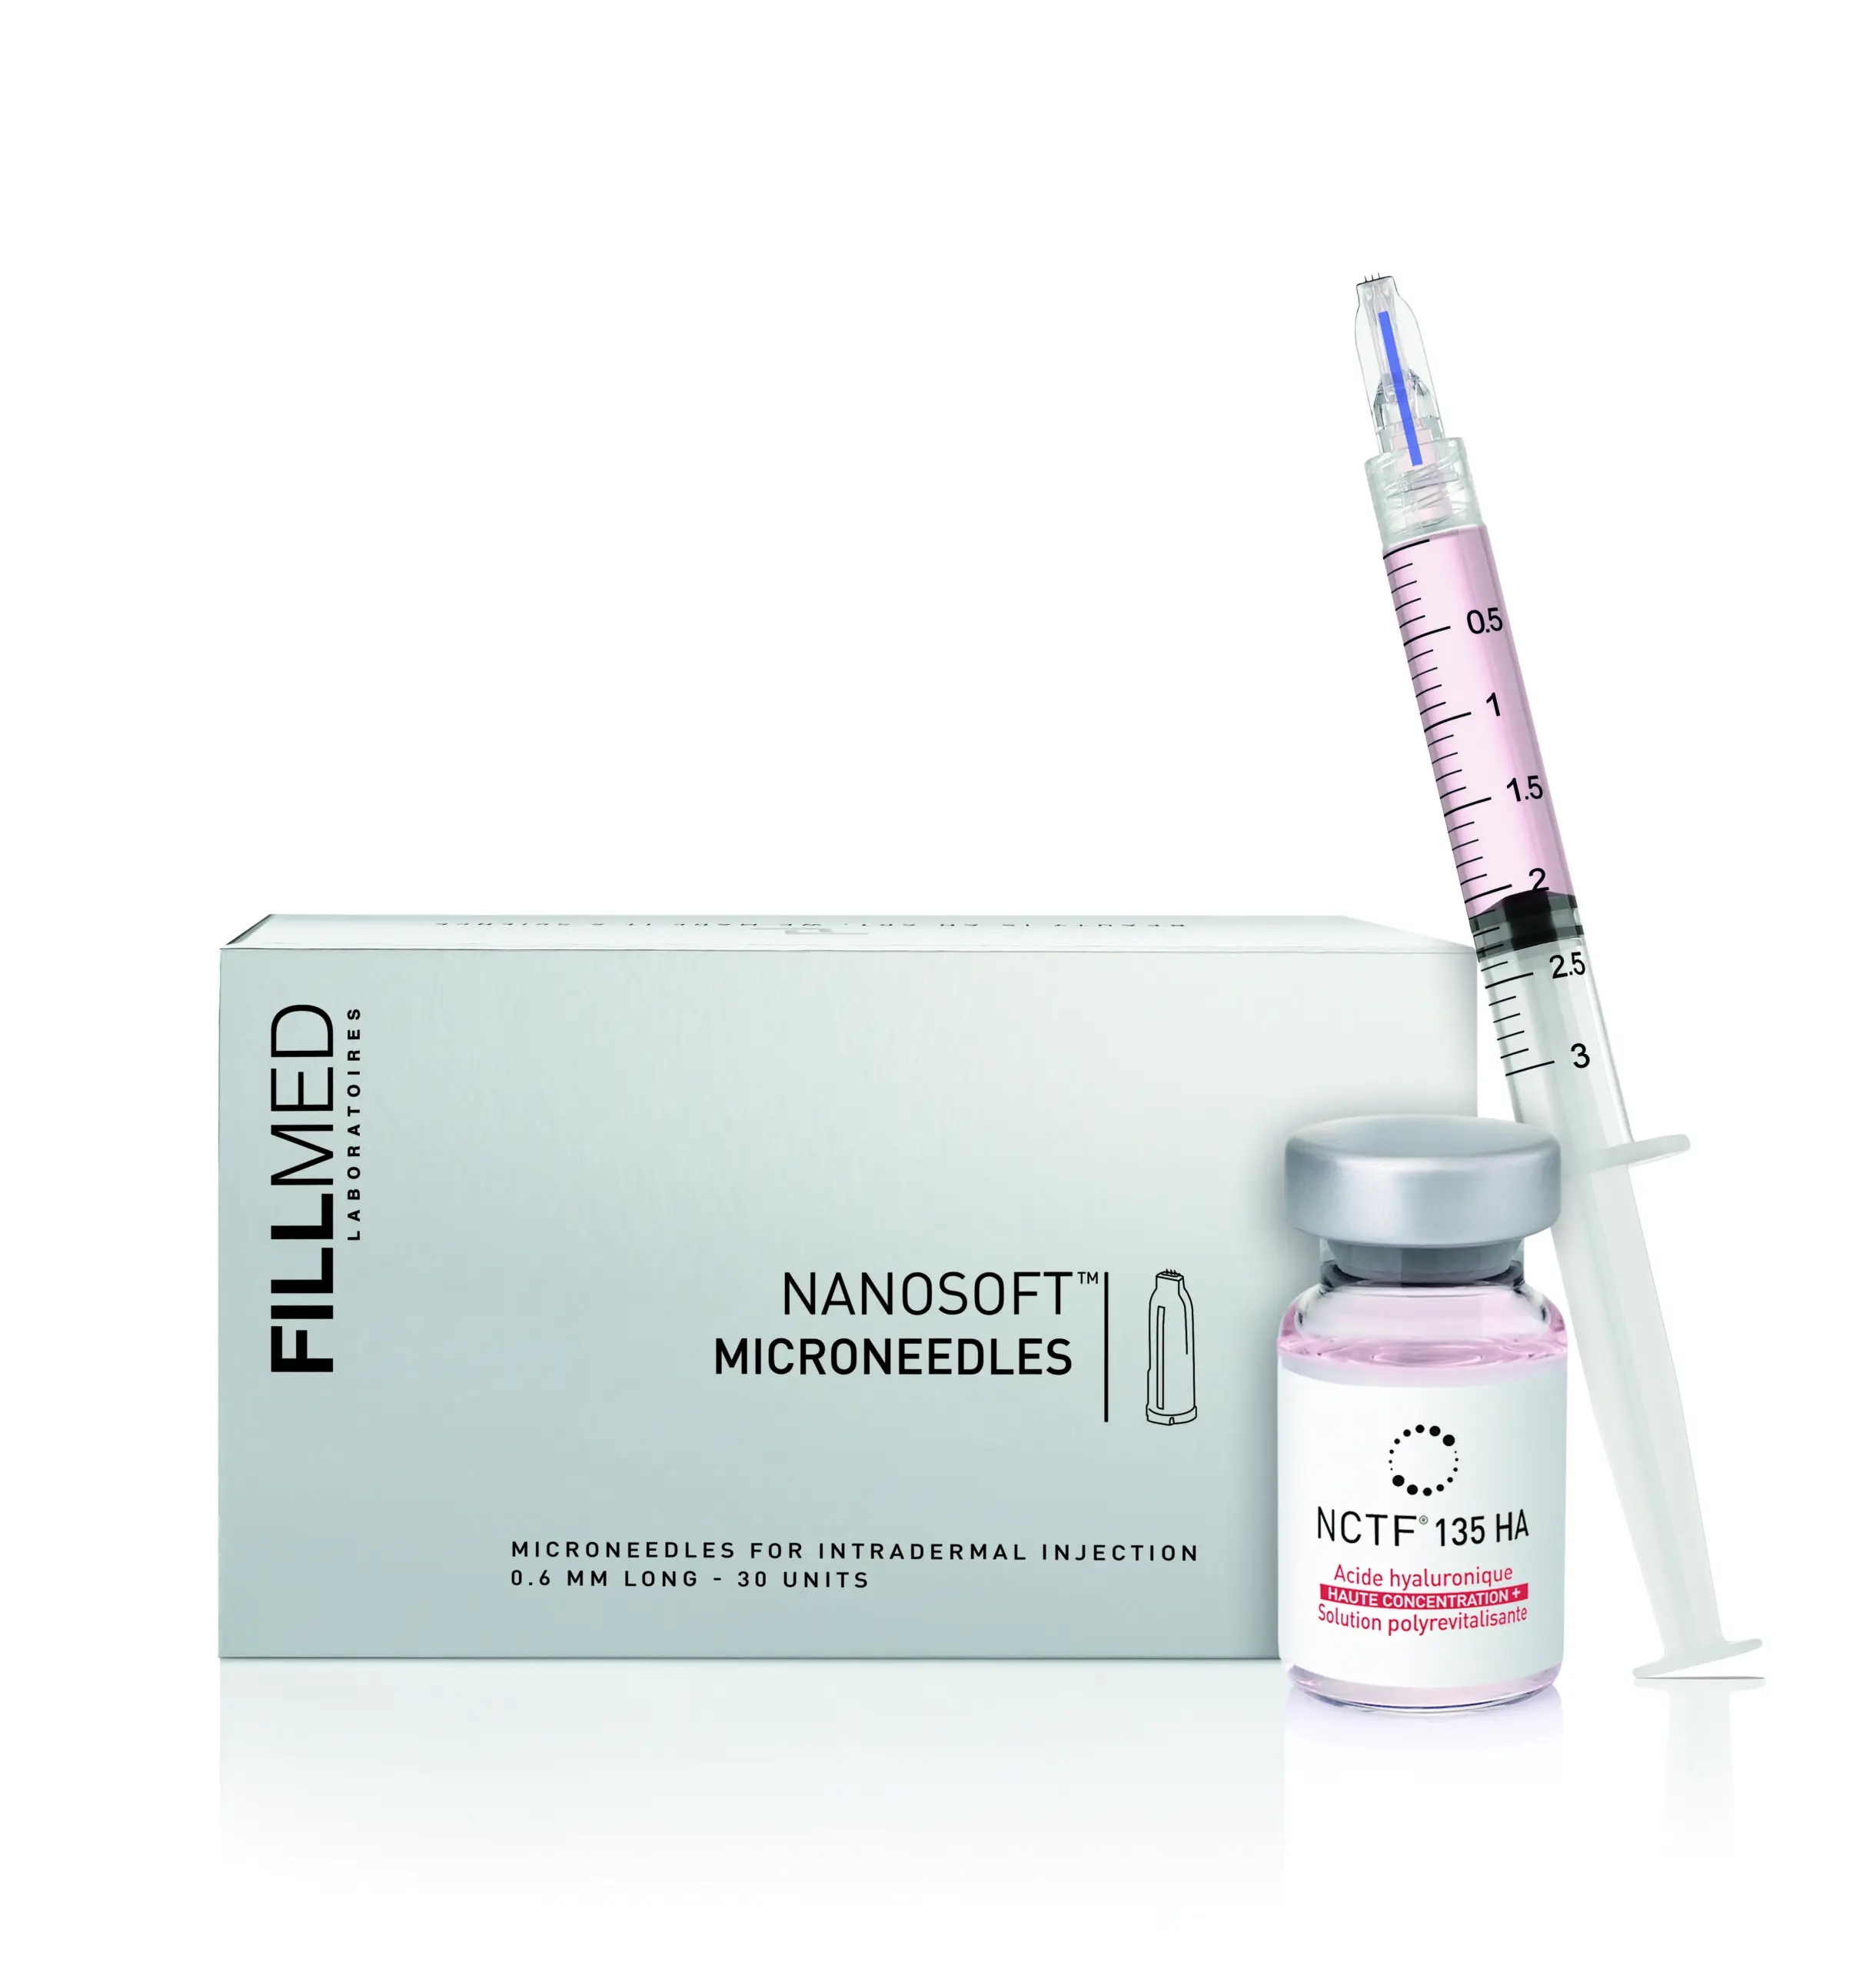 NANOSOFT Microneedle for intradermal injection 0.6mm long (1600190538968)